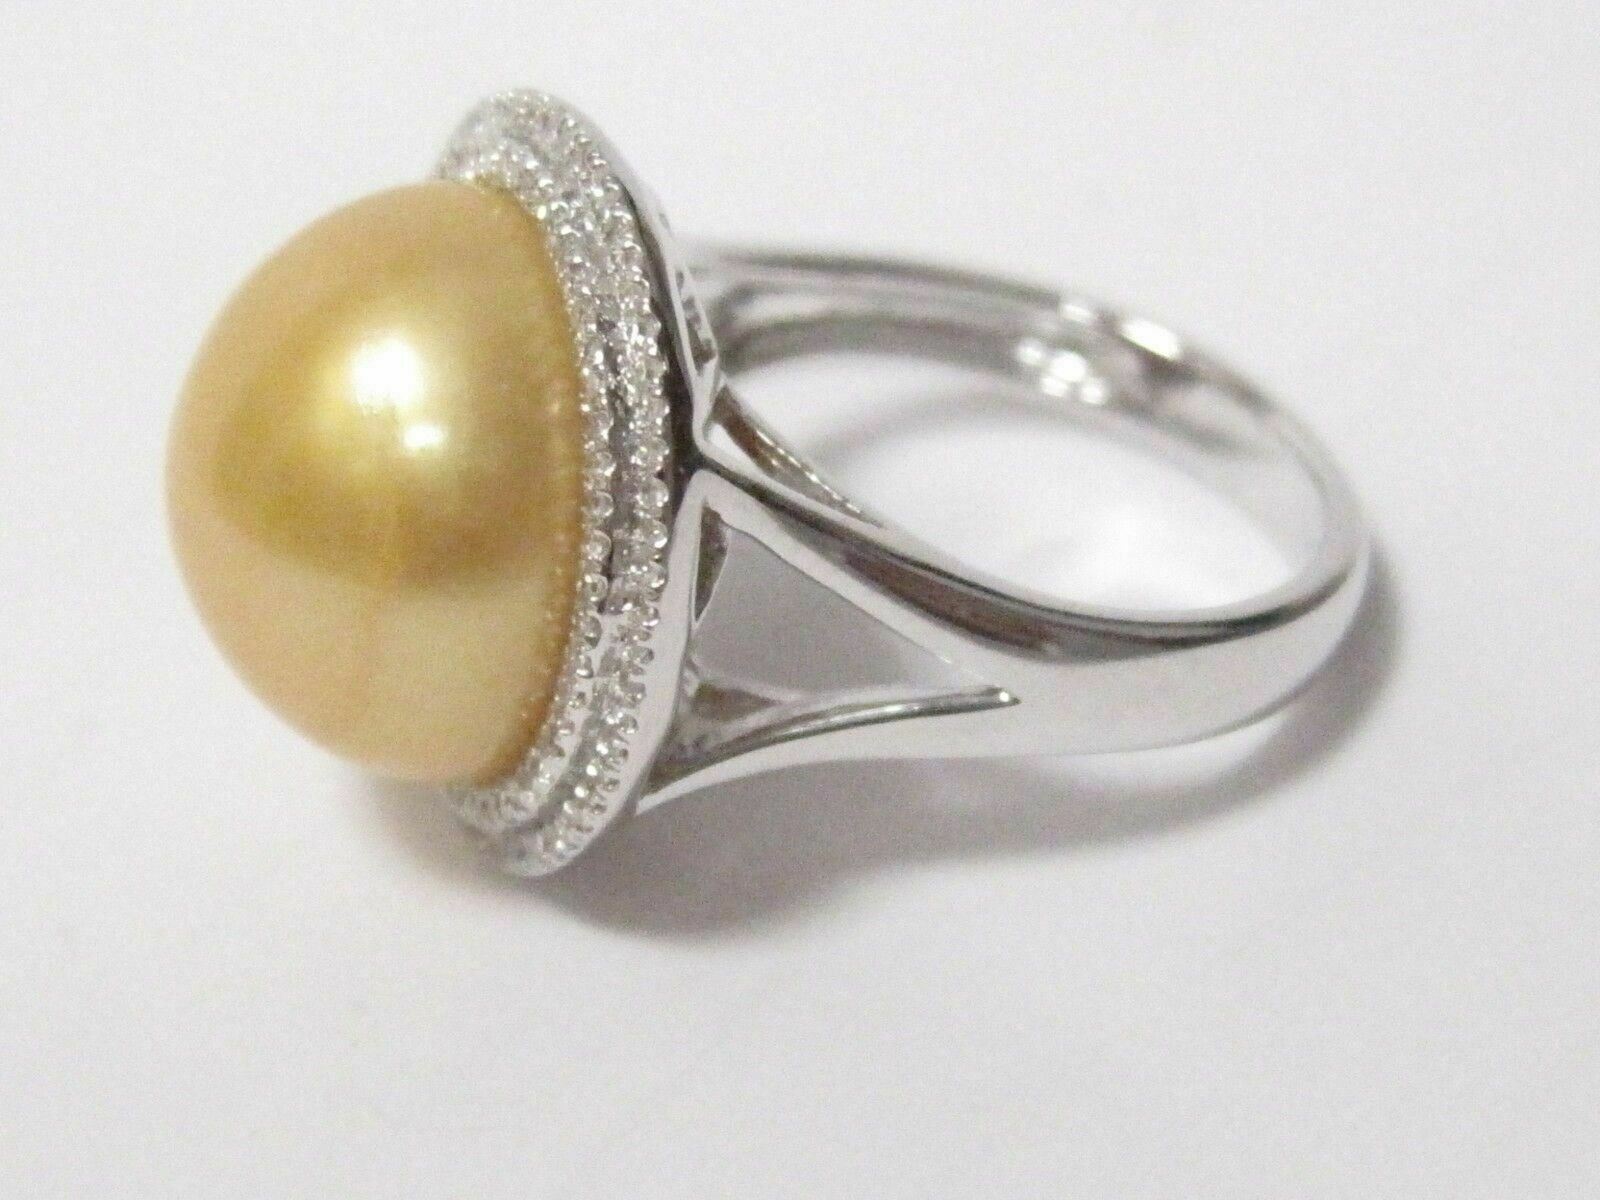 14mm Fresh Water Pearl w/ Diamond Accents Solitaire Ring Size 7 14k White Gold